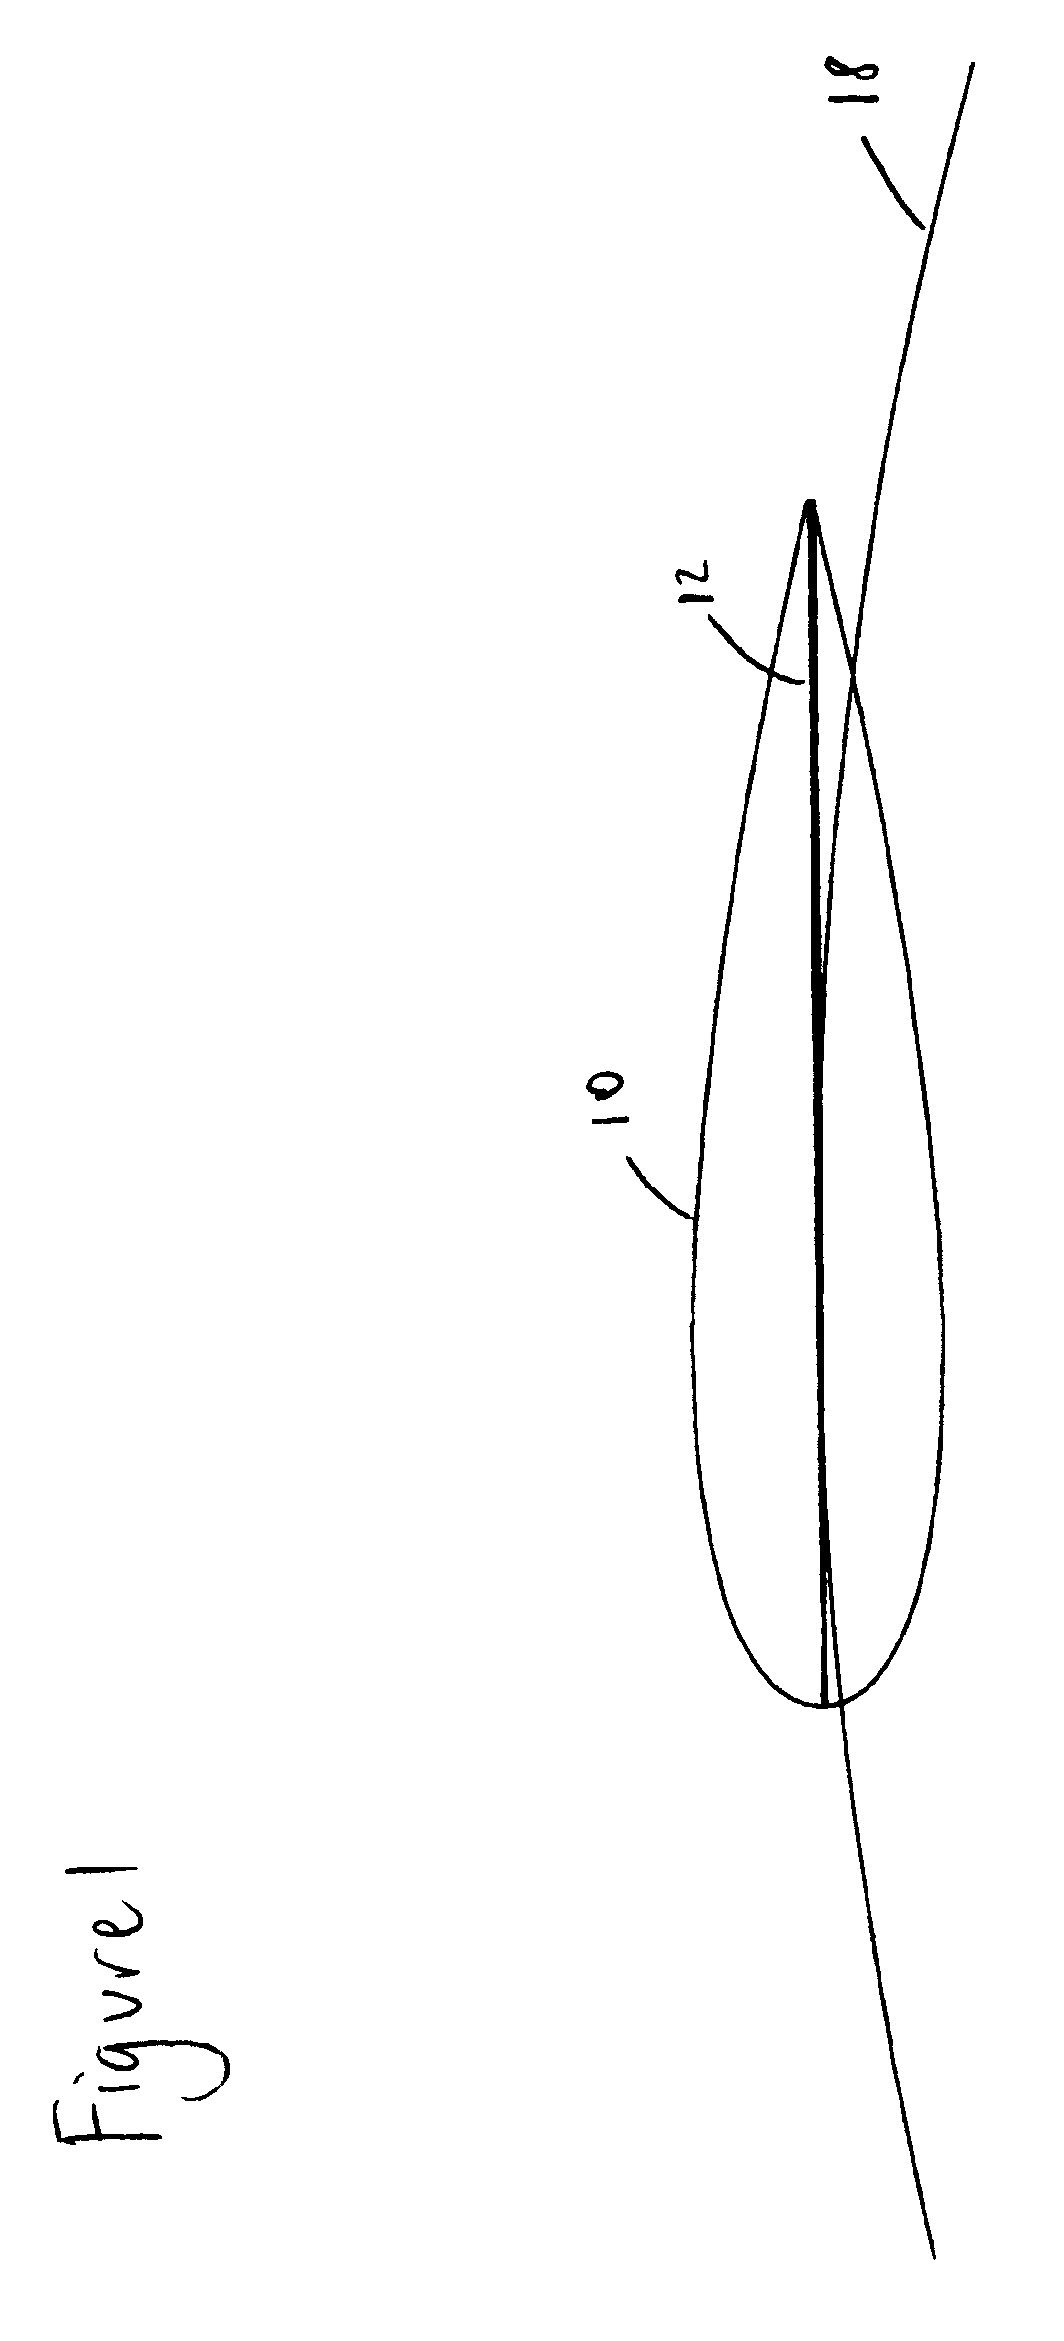 Wind turbine blade having curved camber and method of manufacturing same